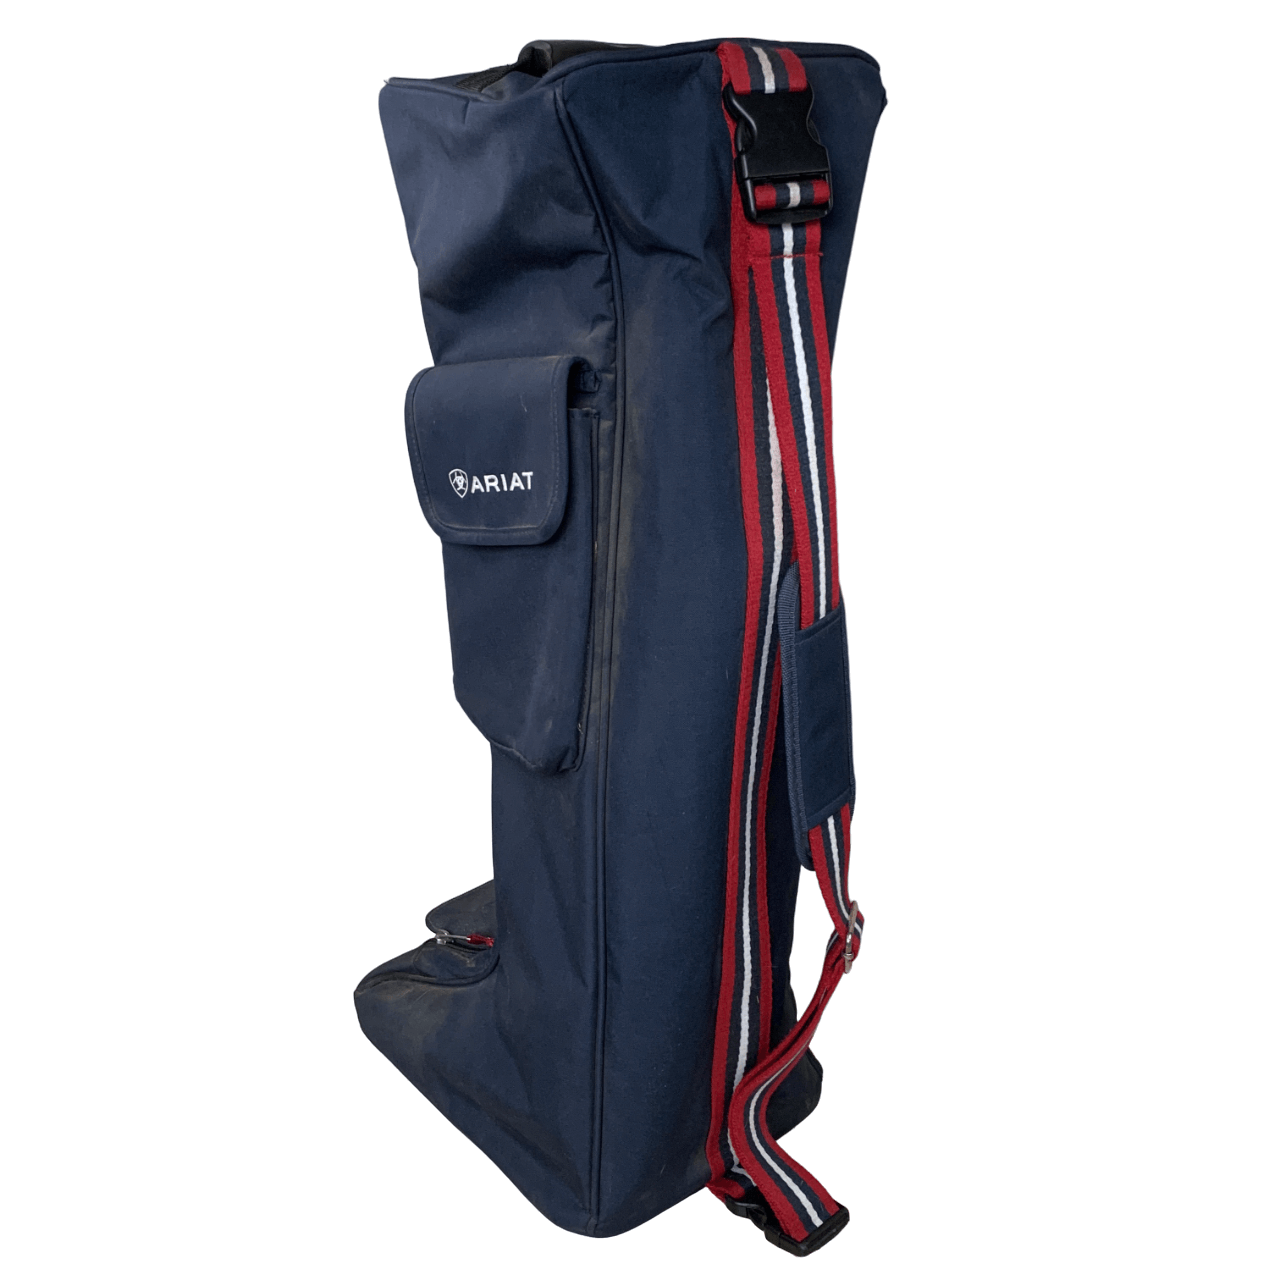 Ariat 'Team' Tall Boot Bag in Blue - One Size